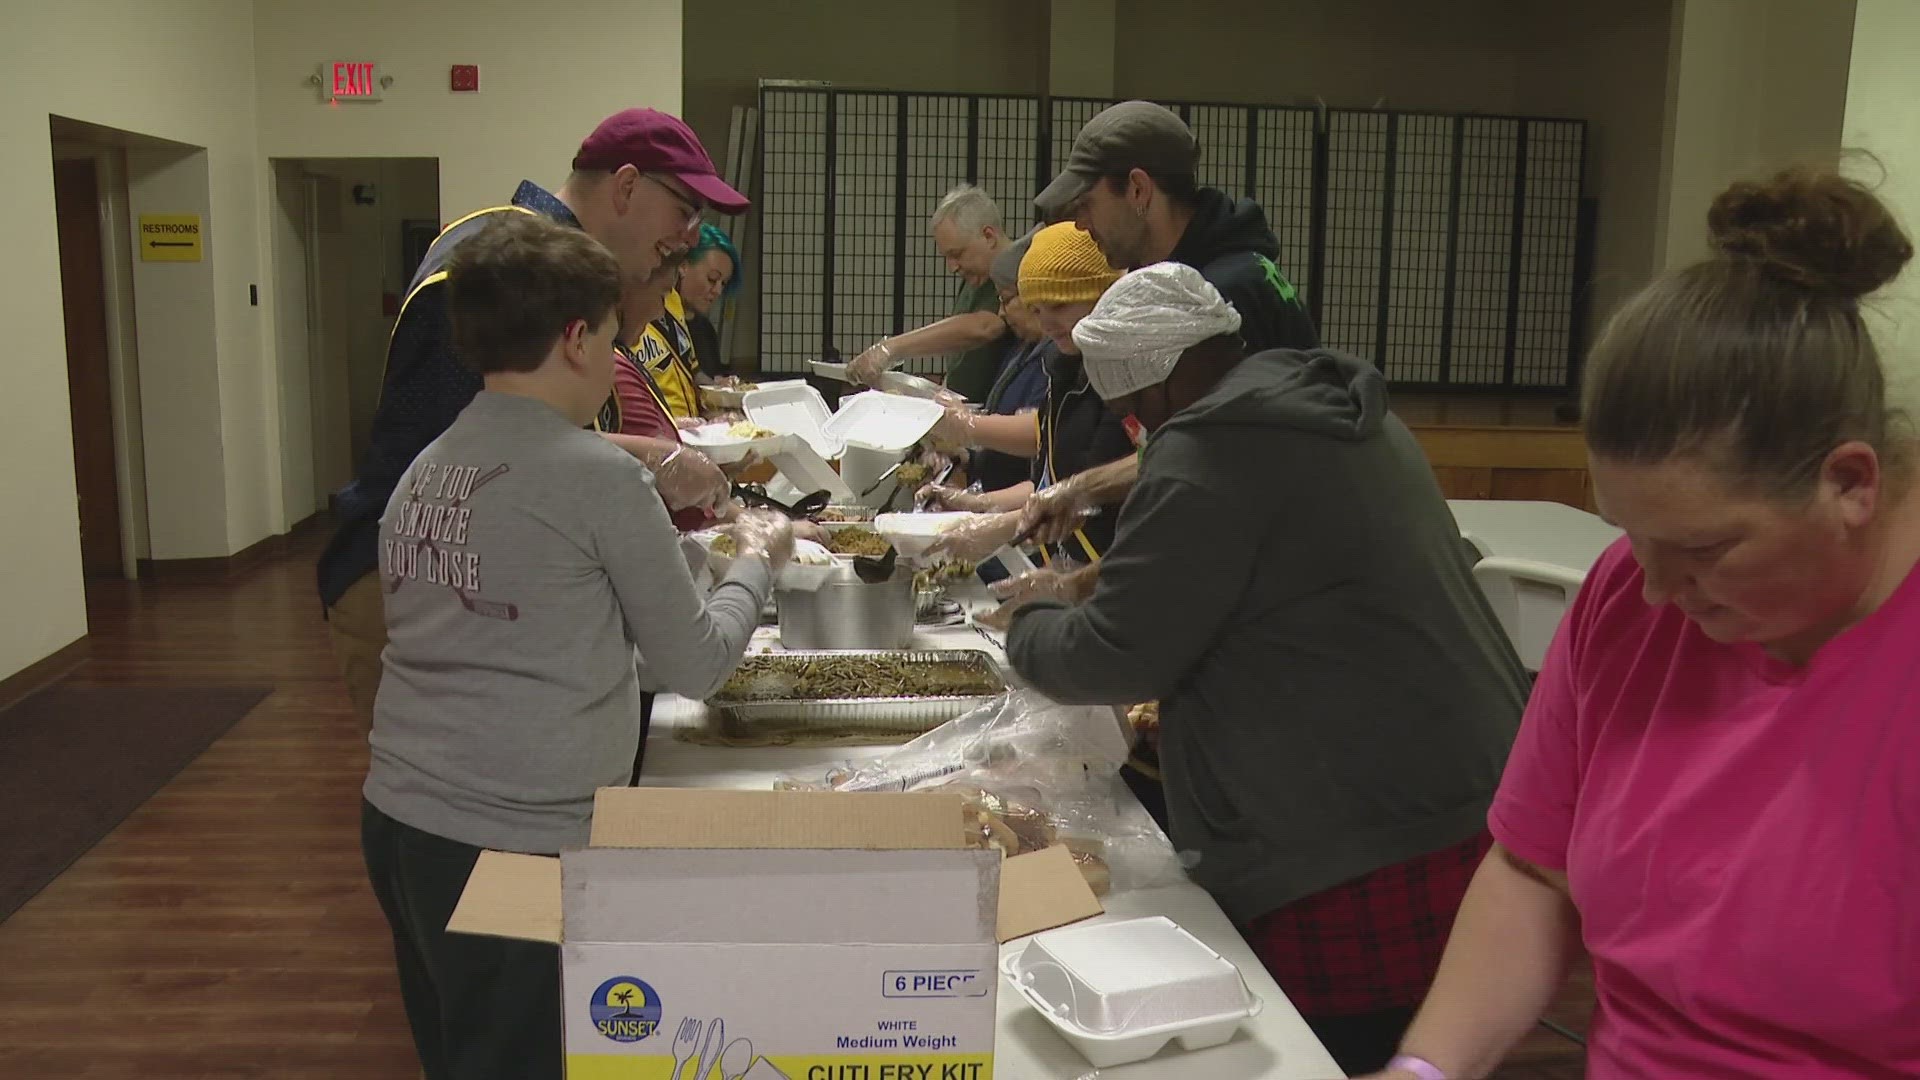 For nearly two decades, Pride St. Louis has continued it effort to make sure no one goes hungry on Thanksgiving Day.